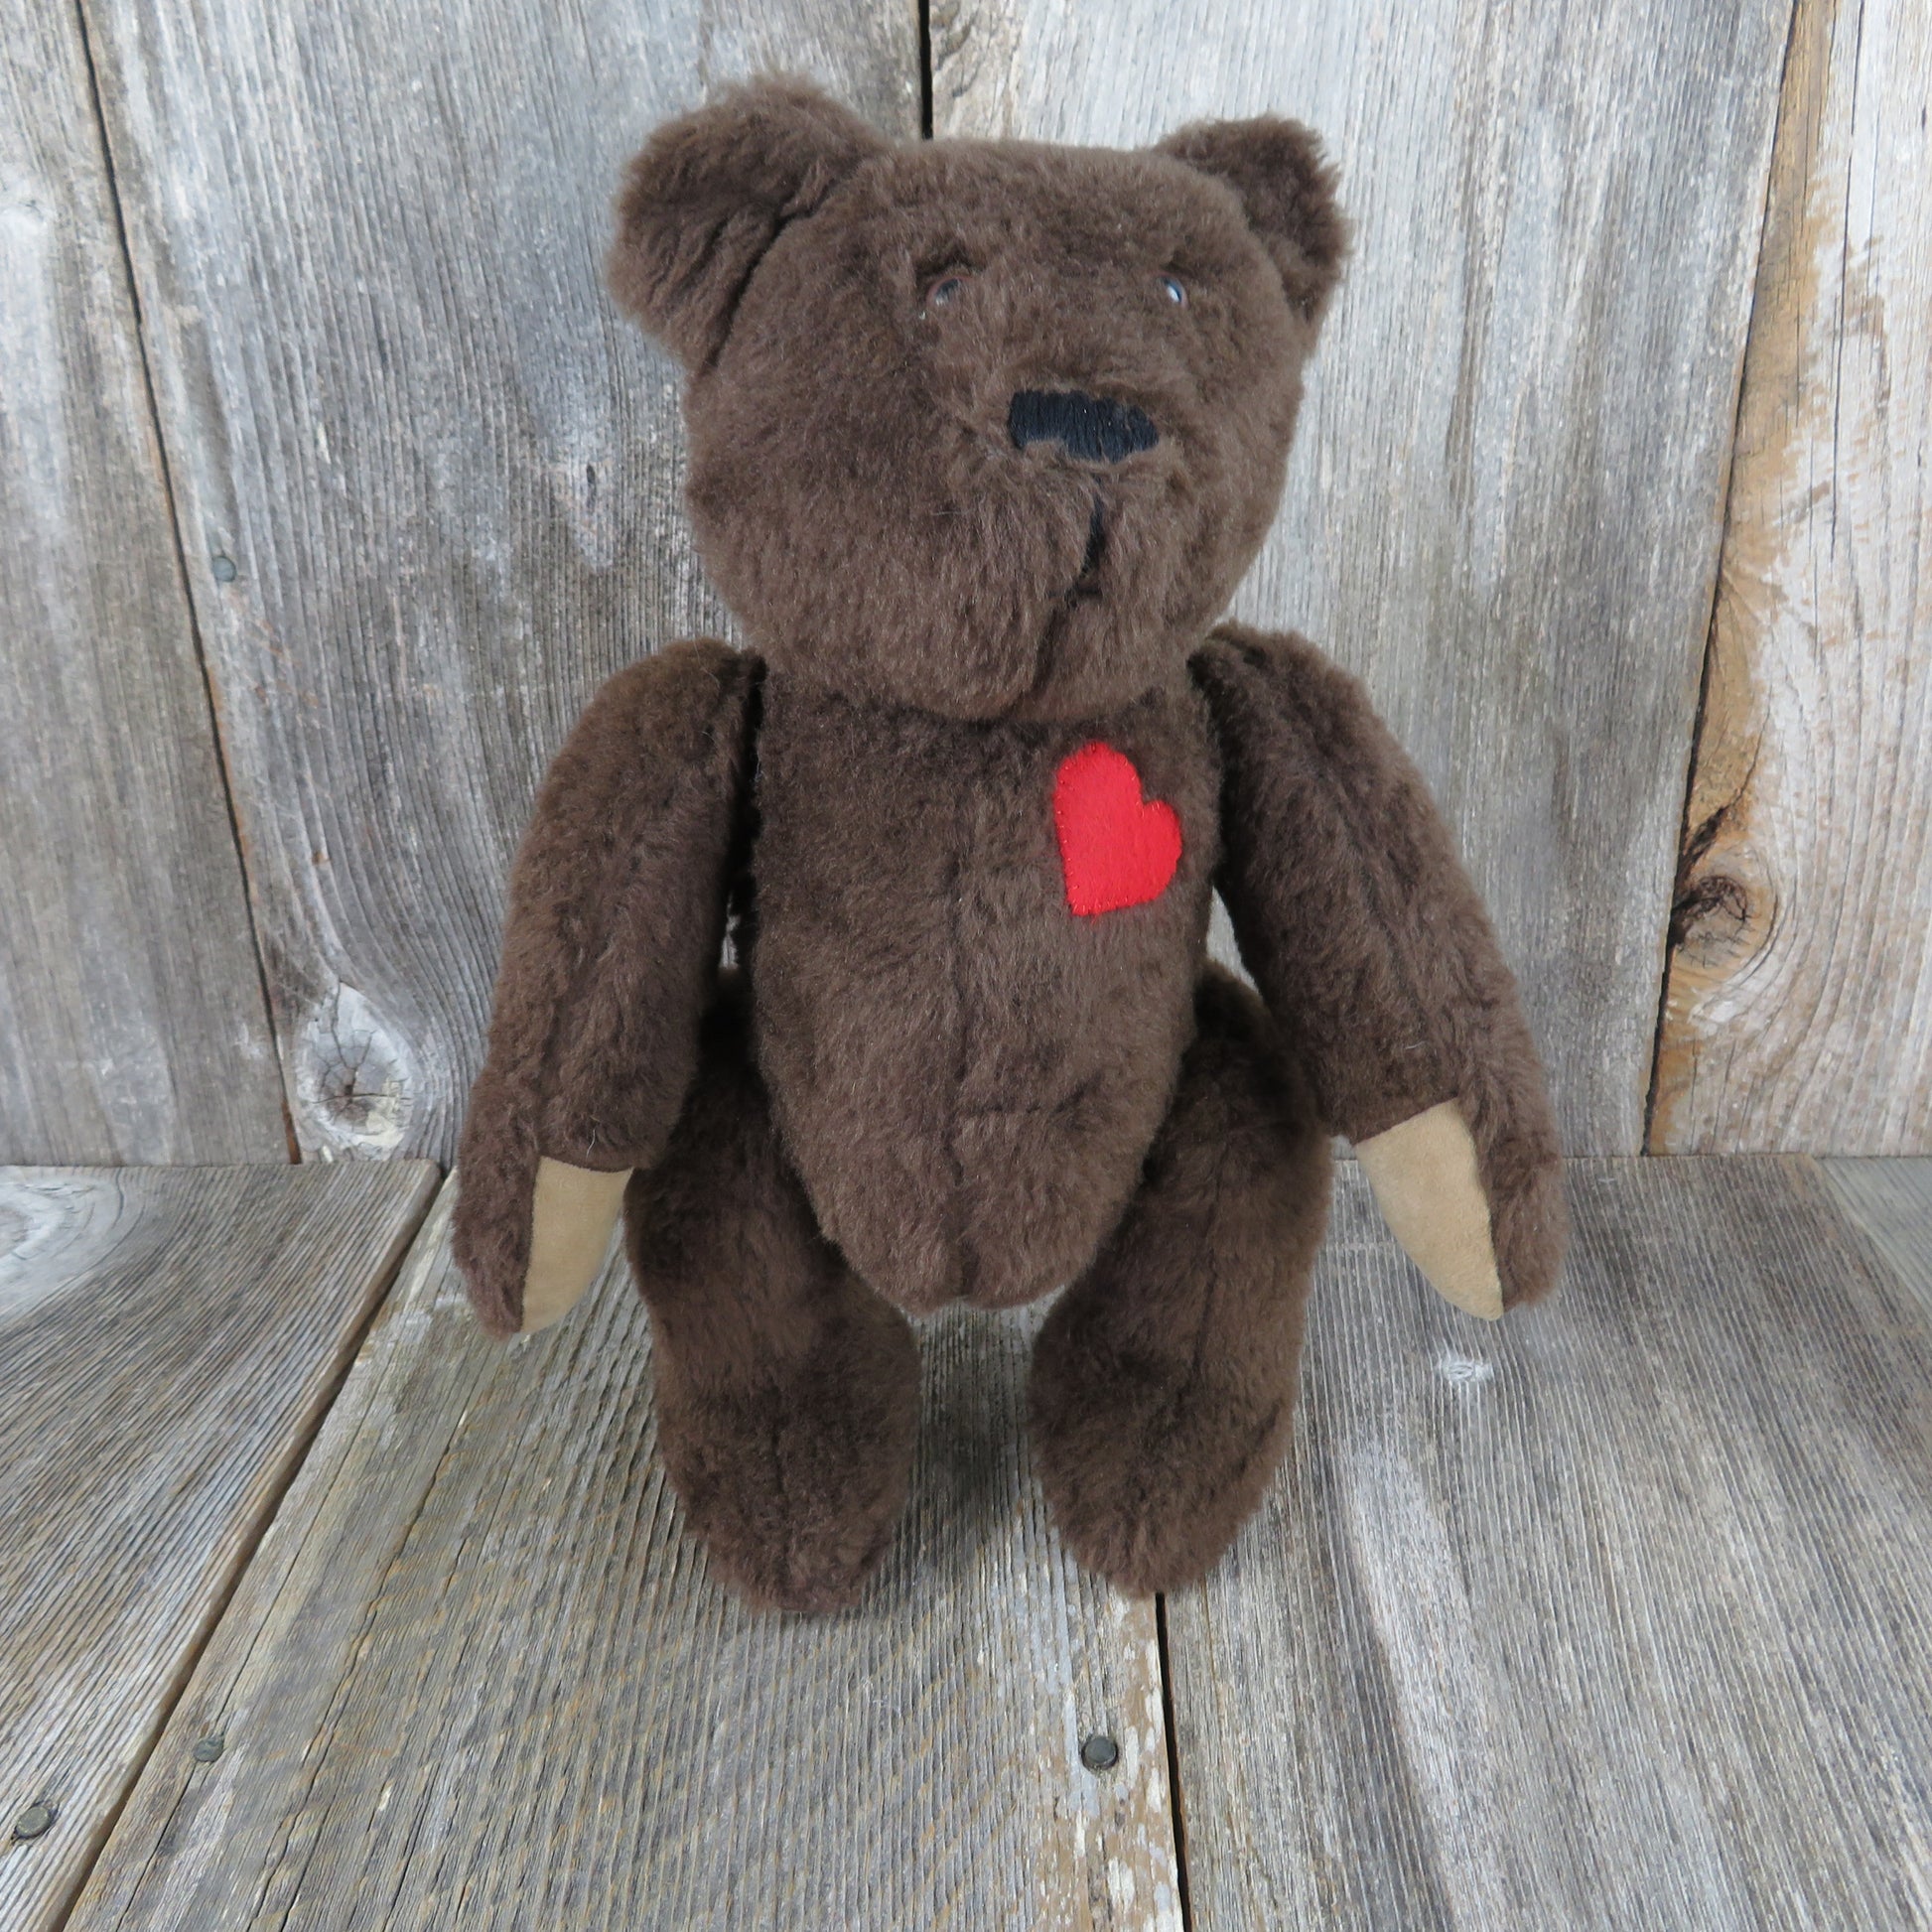 Vintage Handmade Teddy Bear Plush Red Heart Dark Brown Jointed Glass Eyes Stitched Nose Stuffed Animal - At Grandma's Table